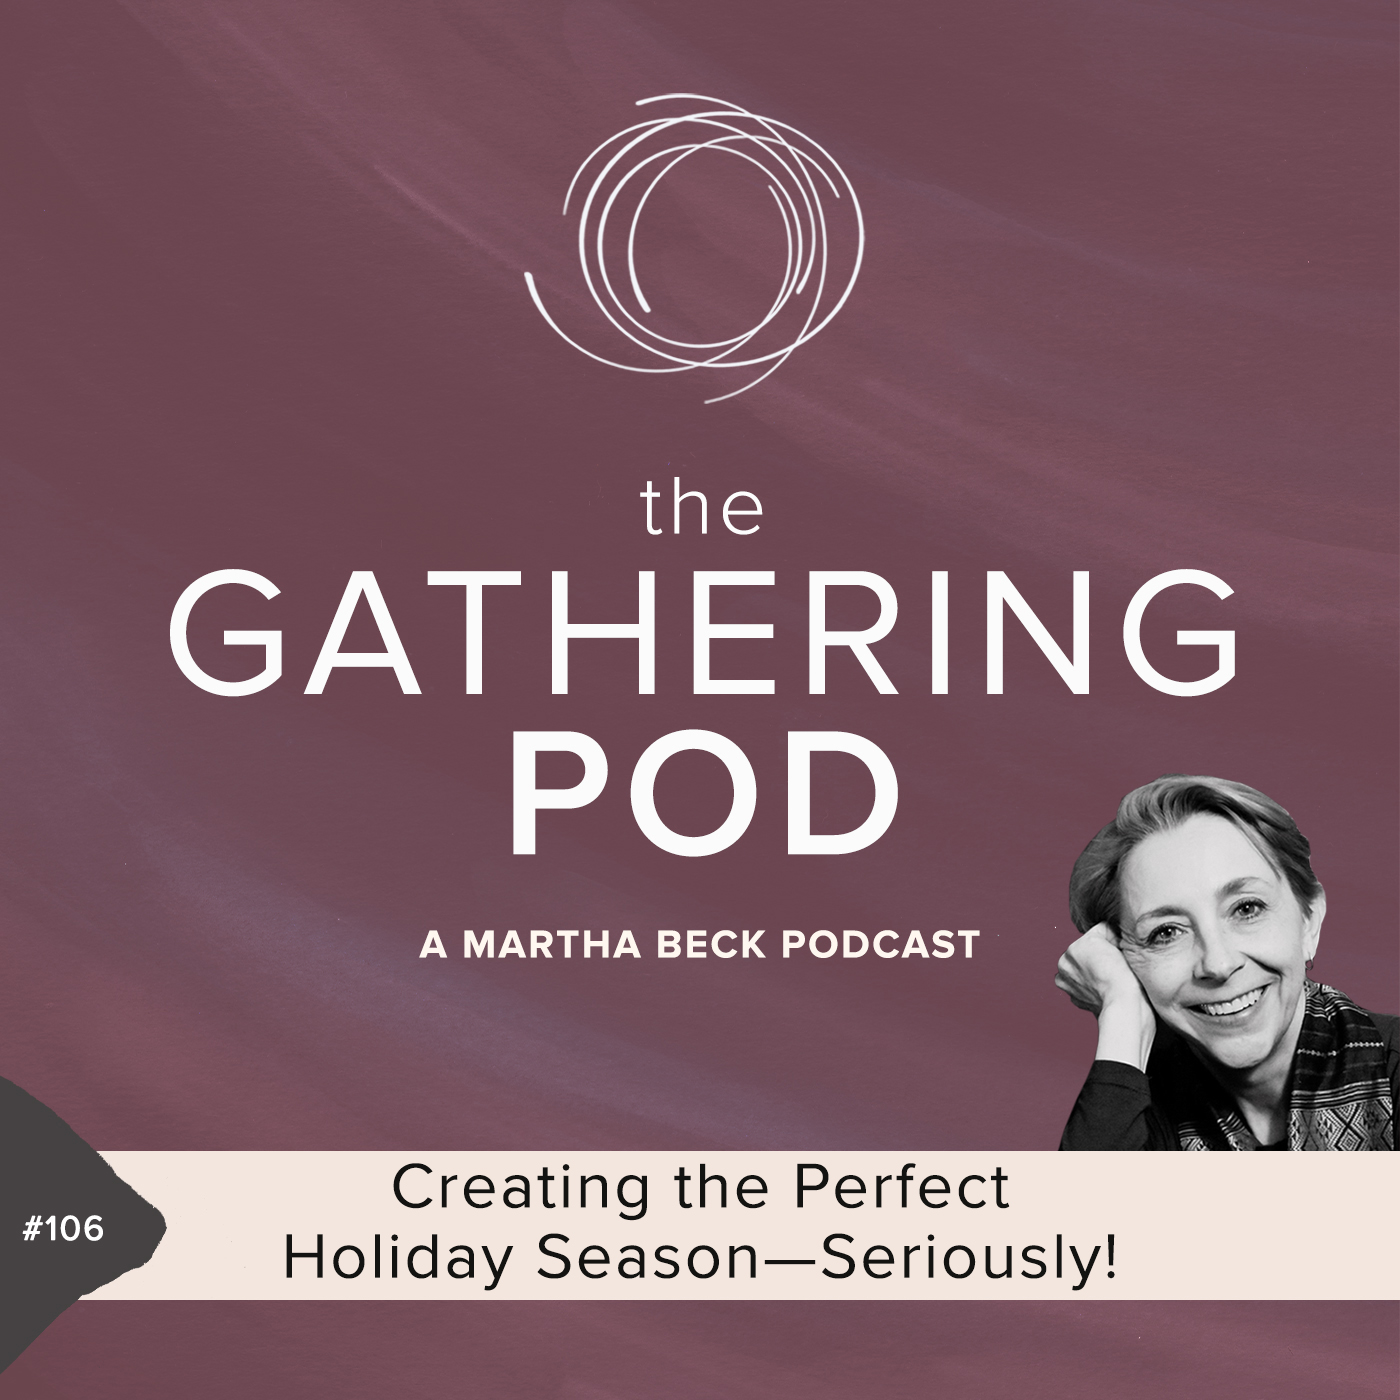 Image for The Gathering Pod A Martha Beck Podcast Episode #106 Creating the Perfect Holiday Season—Seriously!